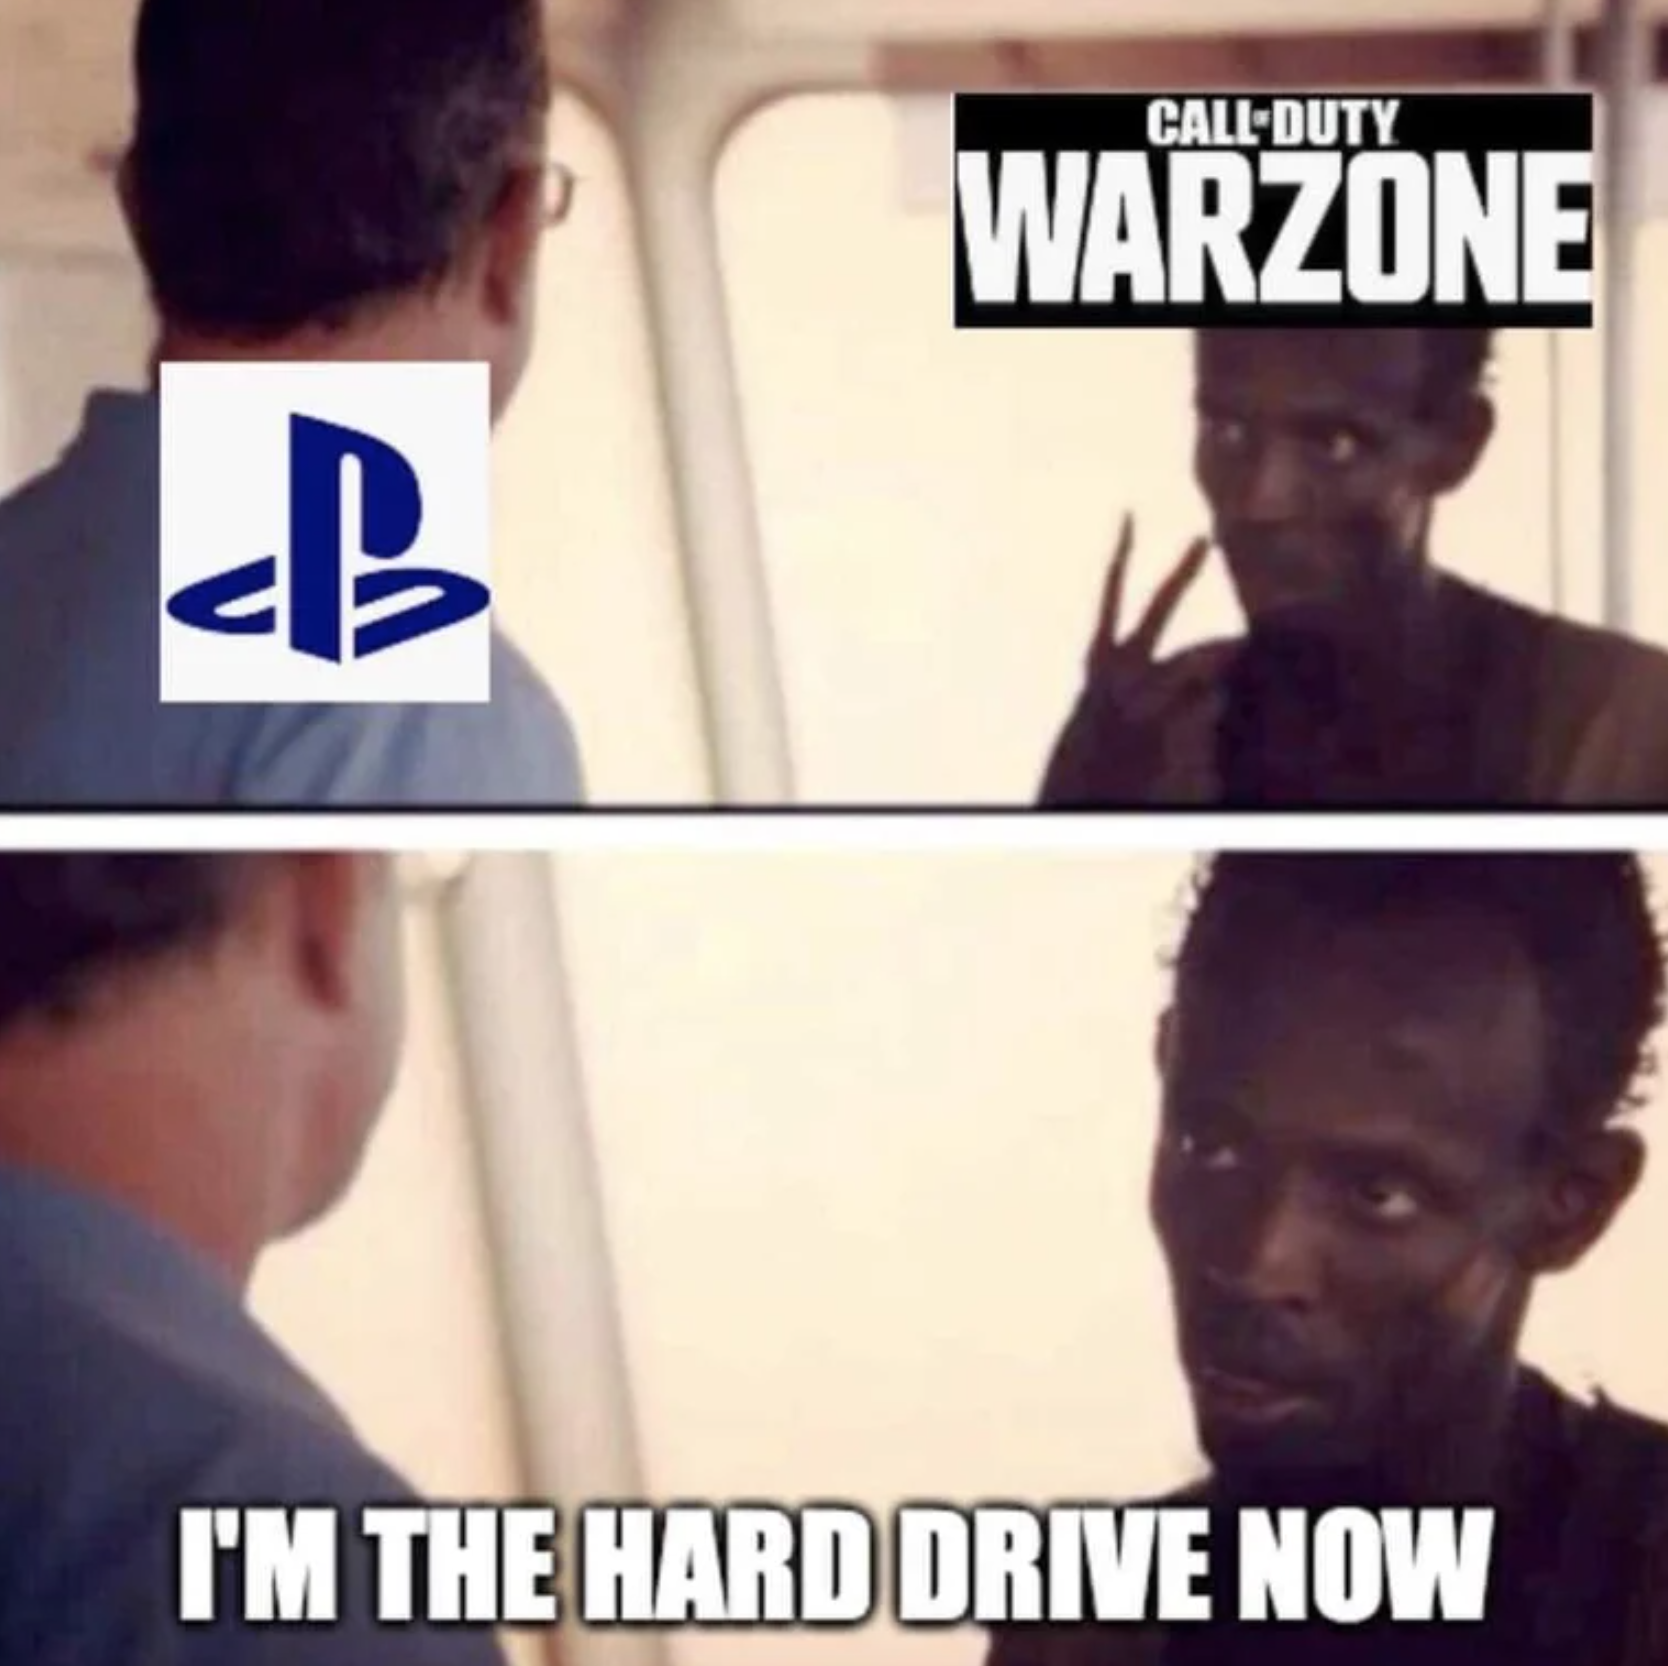 call of duty i am the hard drive now - CallDuty Warzone B I'M The Hard Drive Now